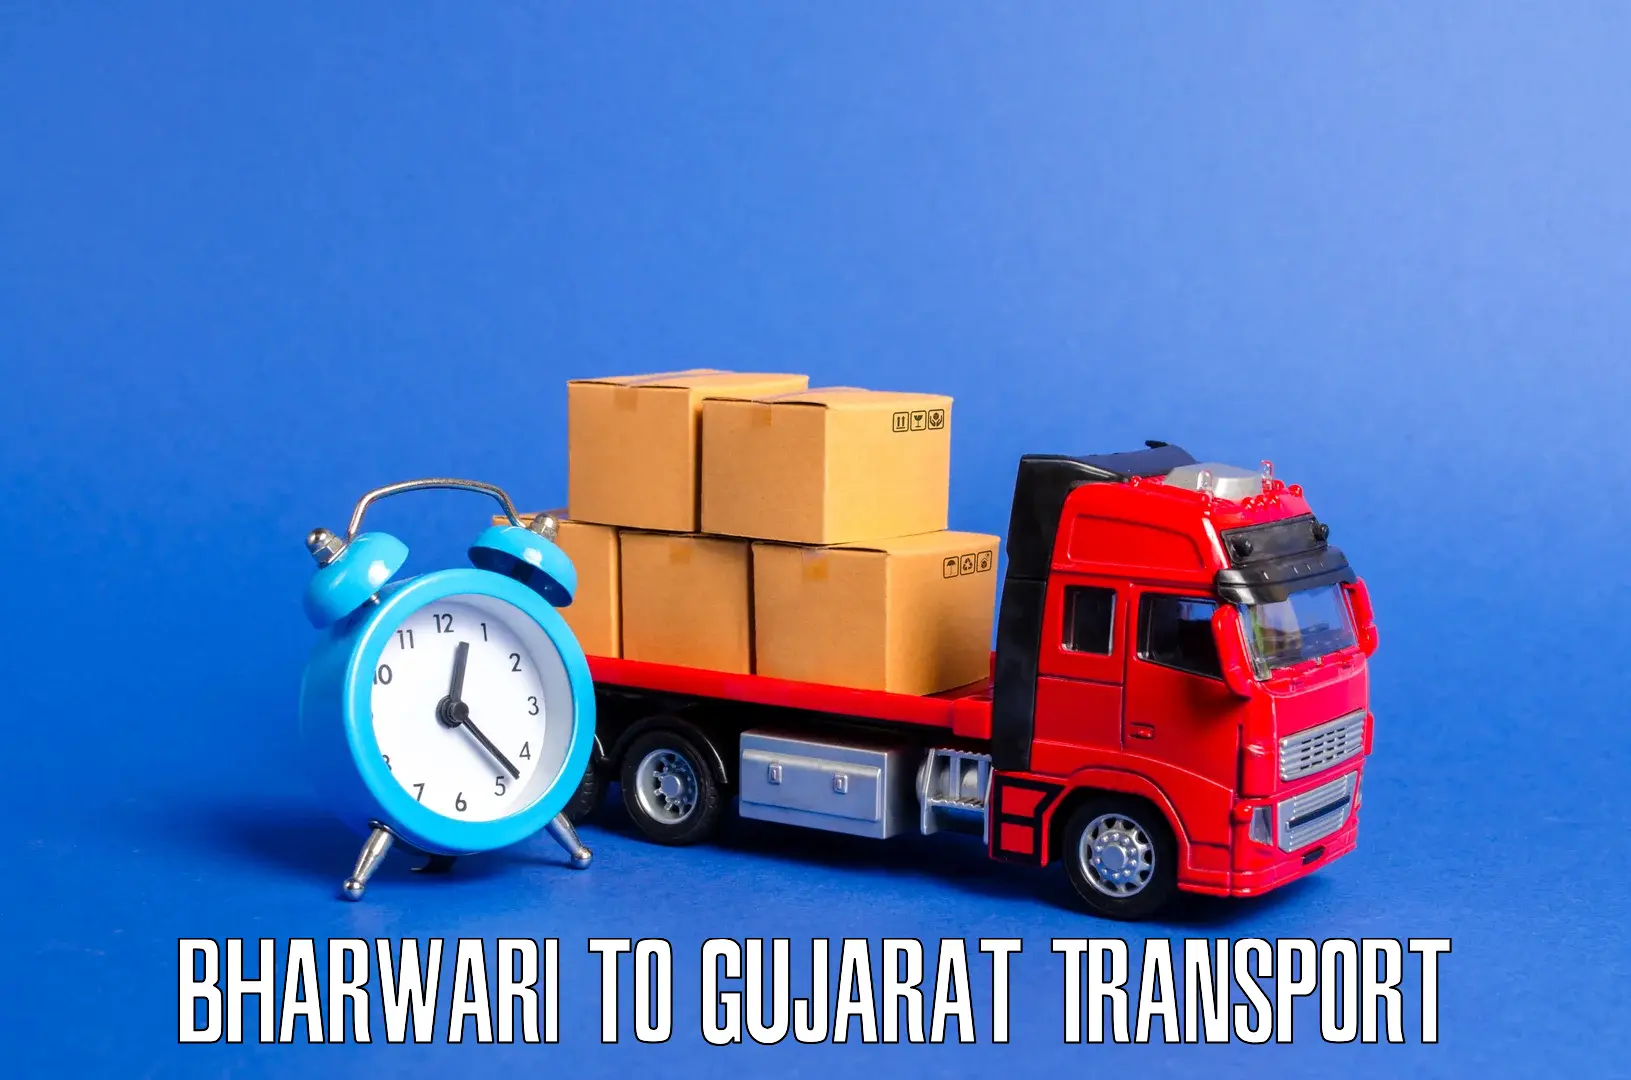 Delivery service in Bharwari to Lunawada